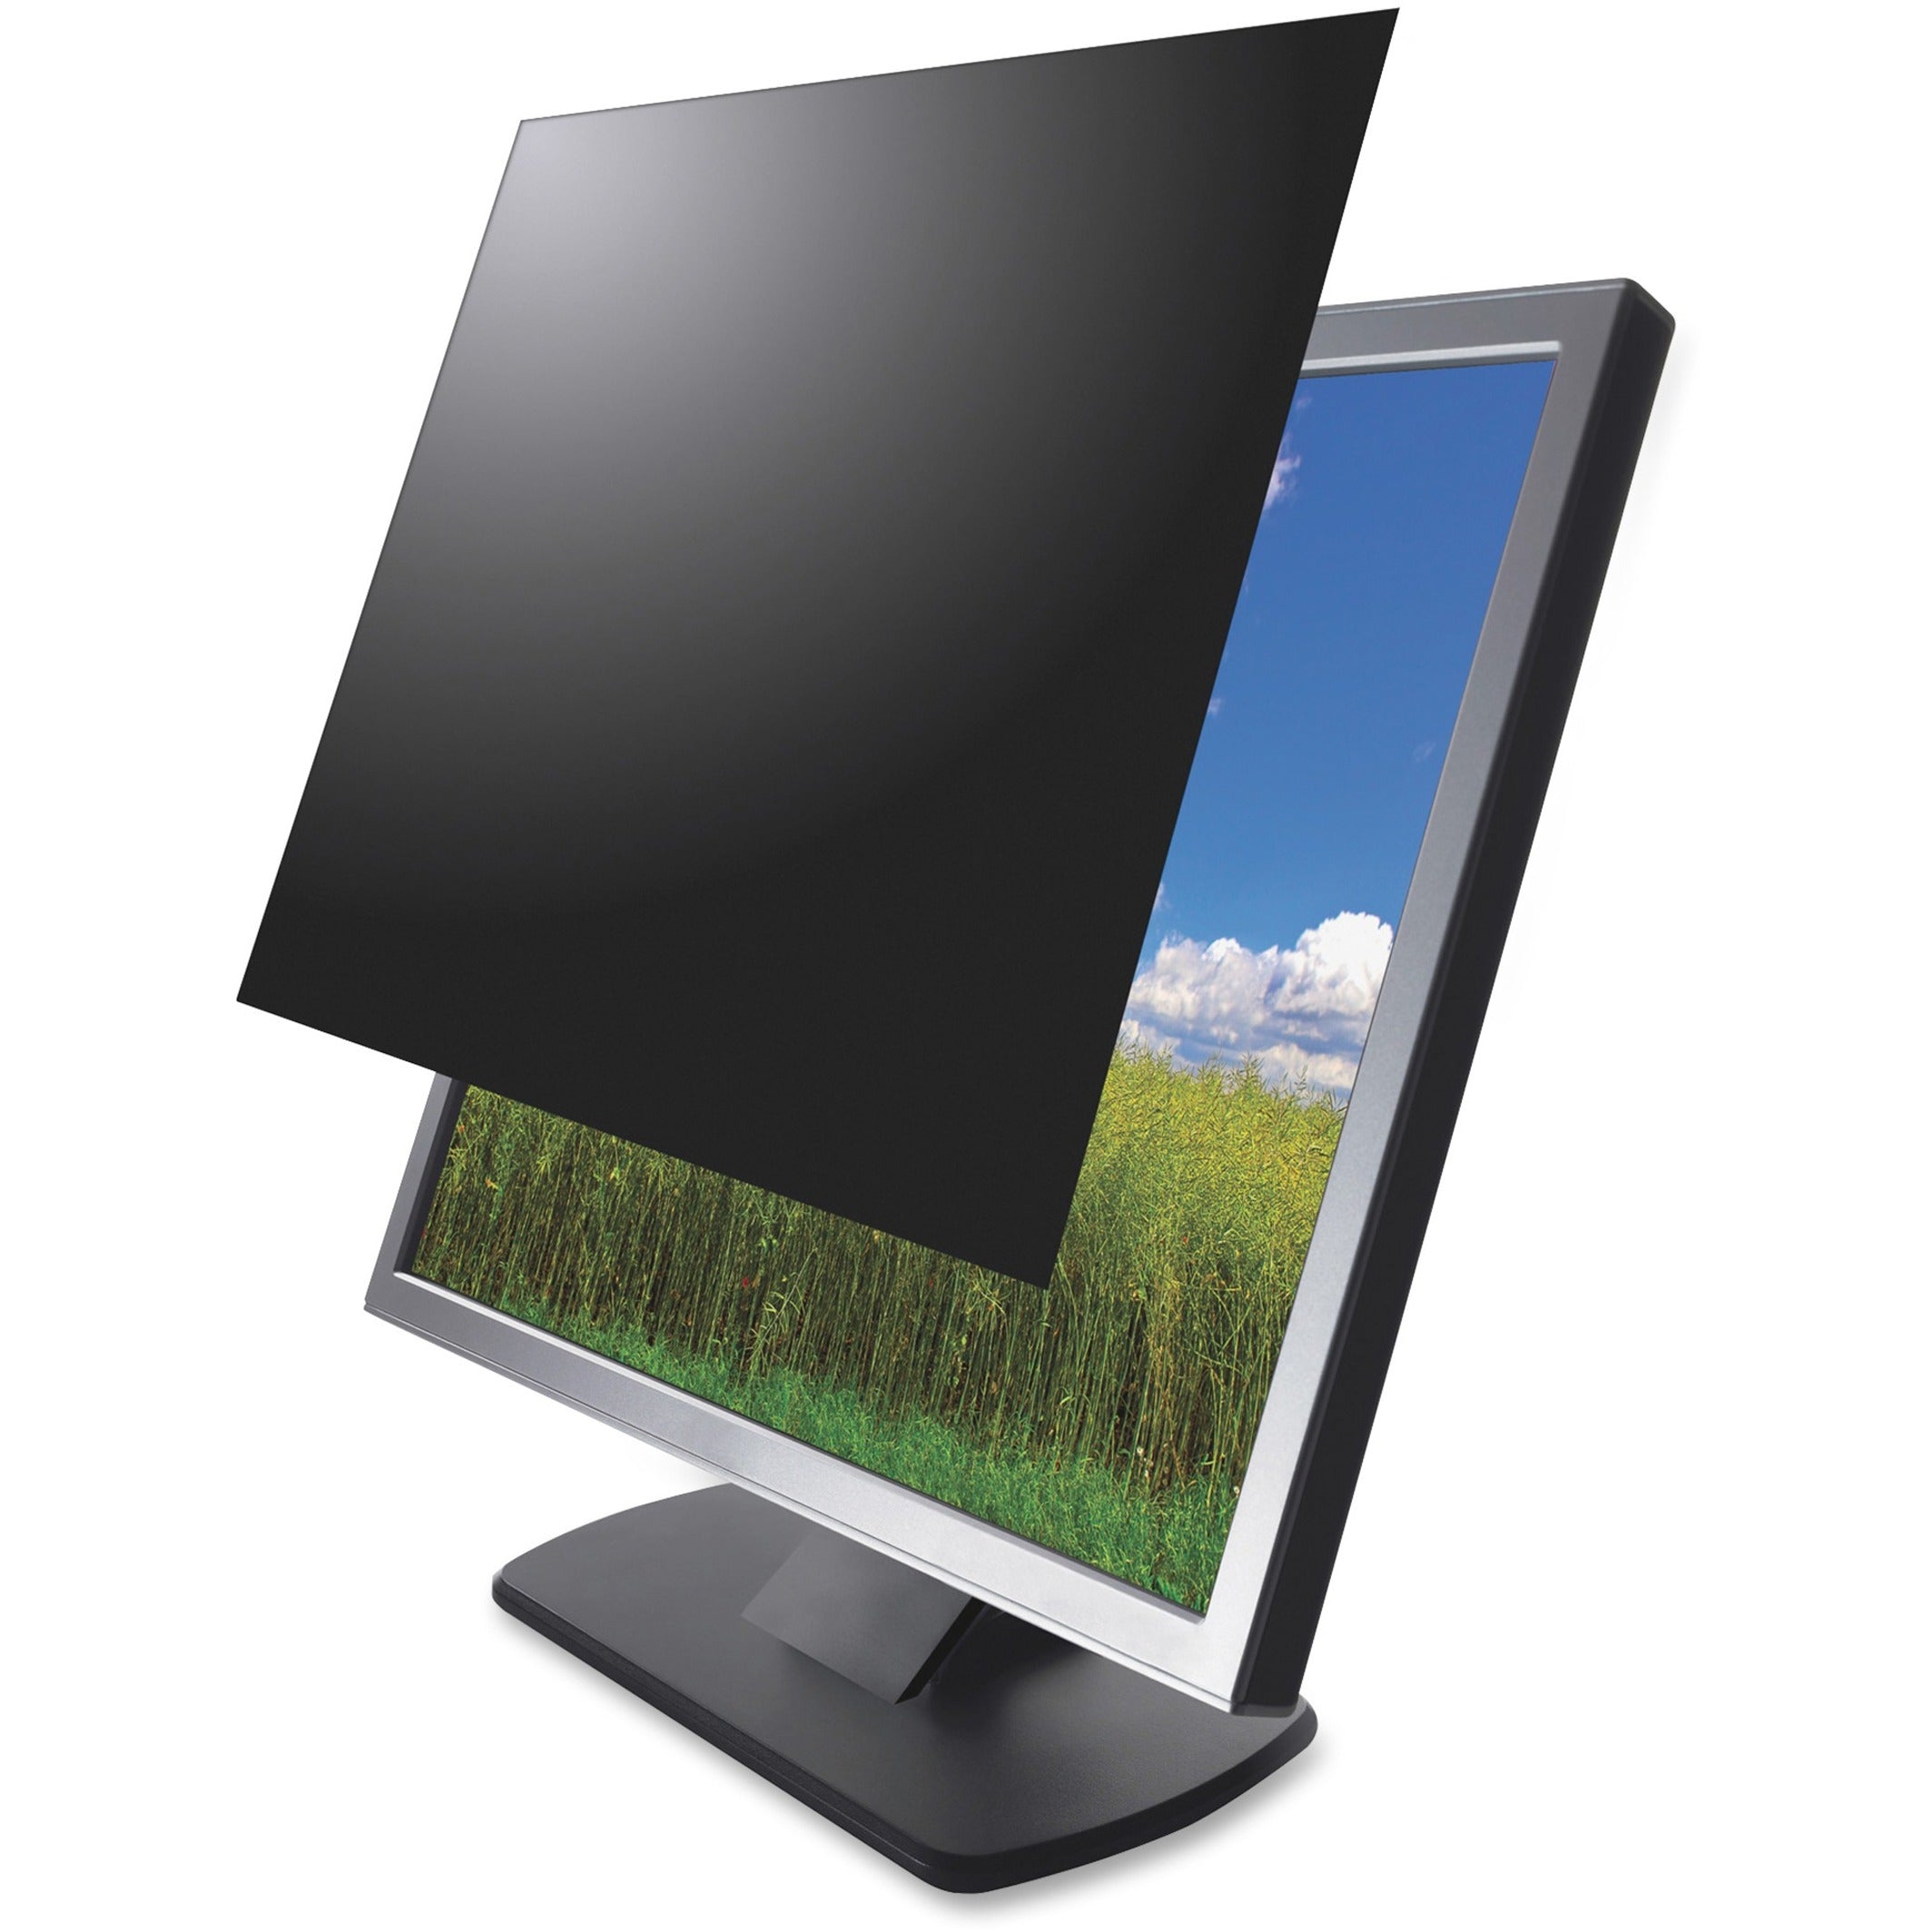 Kantek SVL24W Secure-View Blackout Privacy Filter - Fits 24 Widescreen Monitors, Anti-glare, Microlouver Privacy Technology